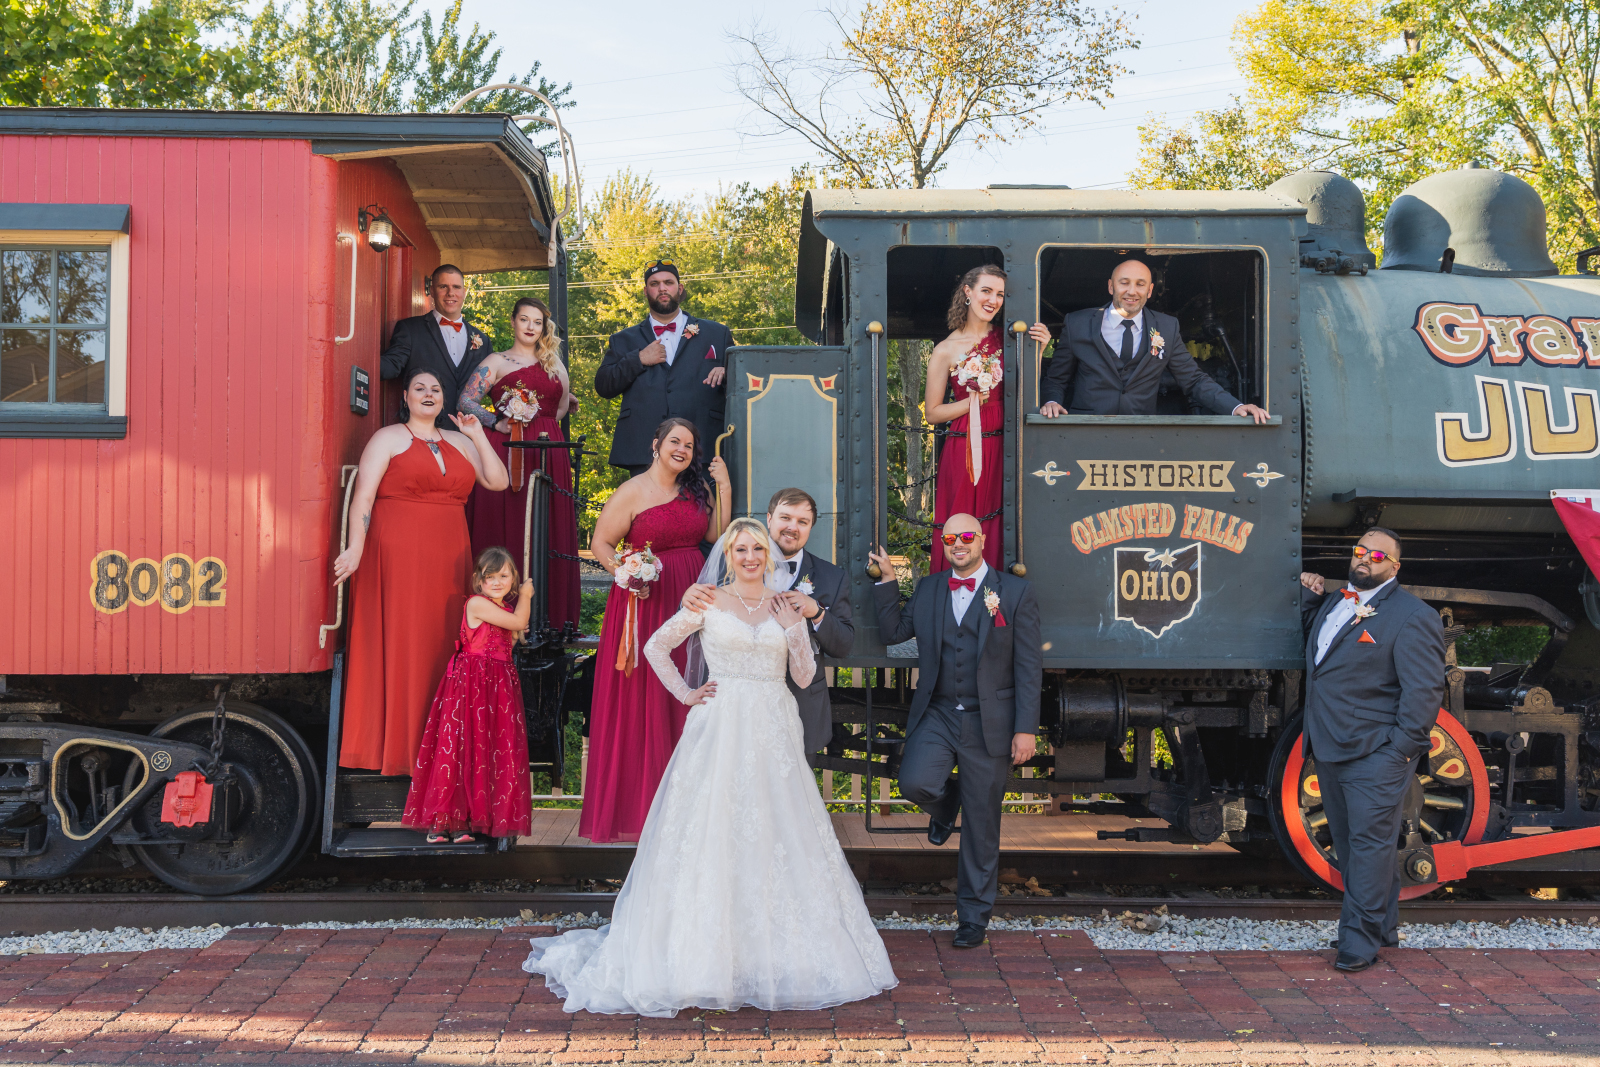 Bride and groom with bridal party, train, bridal party portrait, unique bridal party portrait, Historic Olmsted Falls Ohio, Grand Pacific Junction, fall wedding, cute outdoor wedding ceremony at Grand Pacific Wedding Gardens